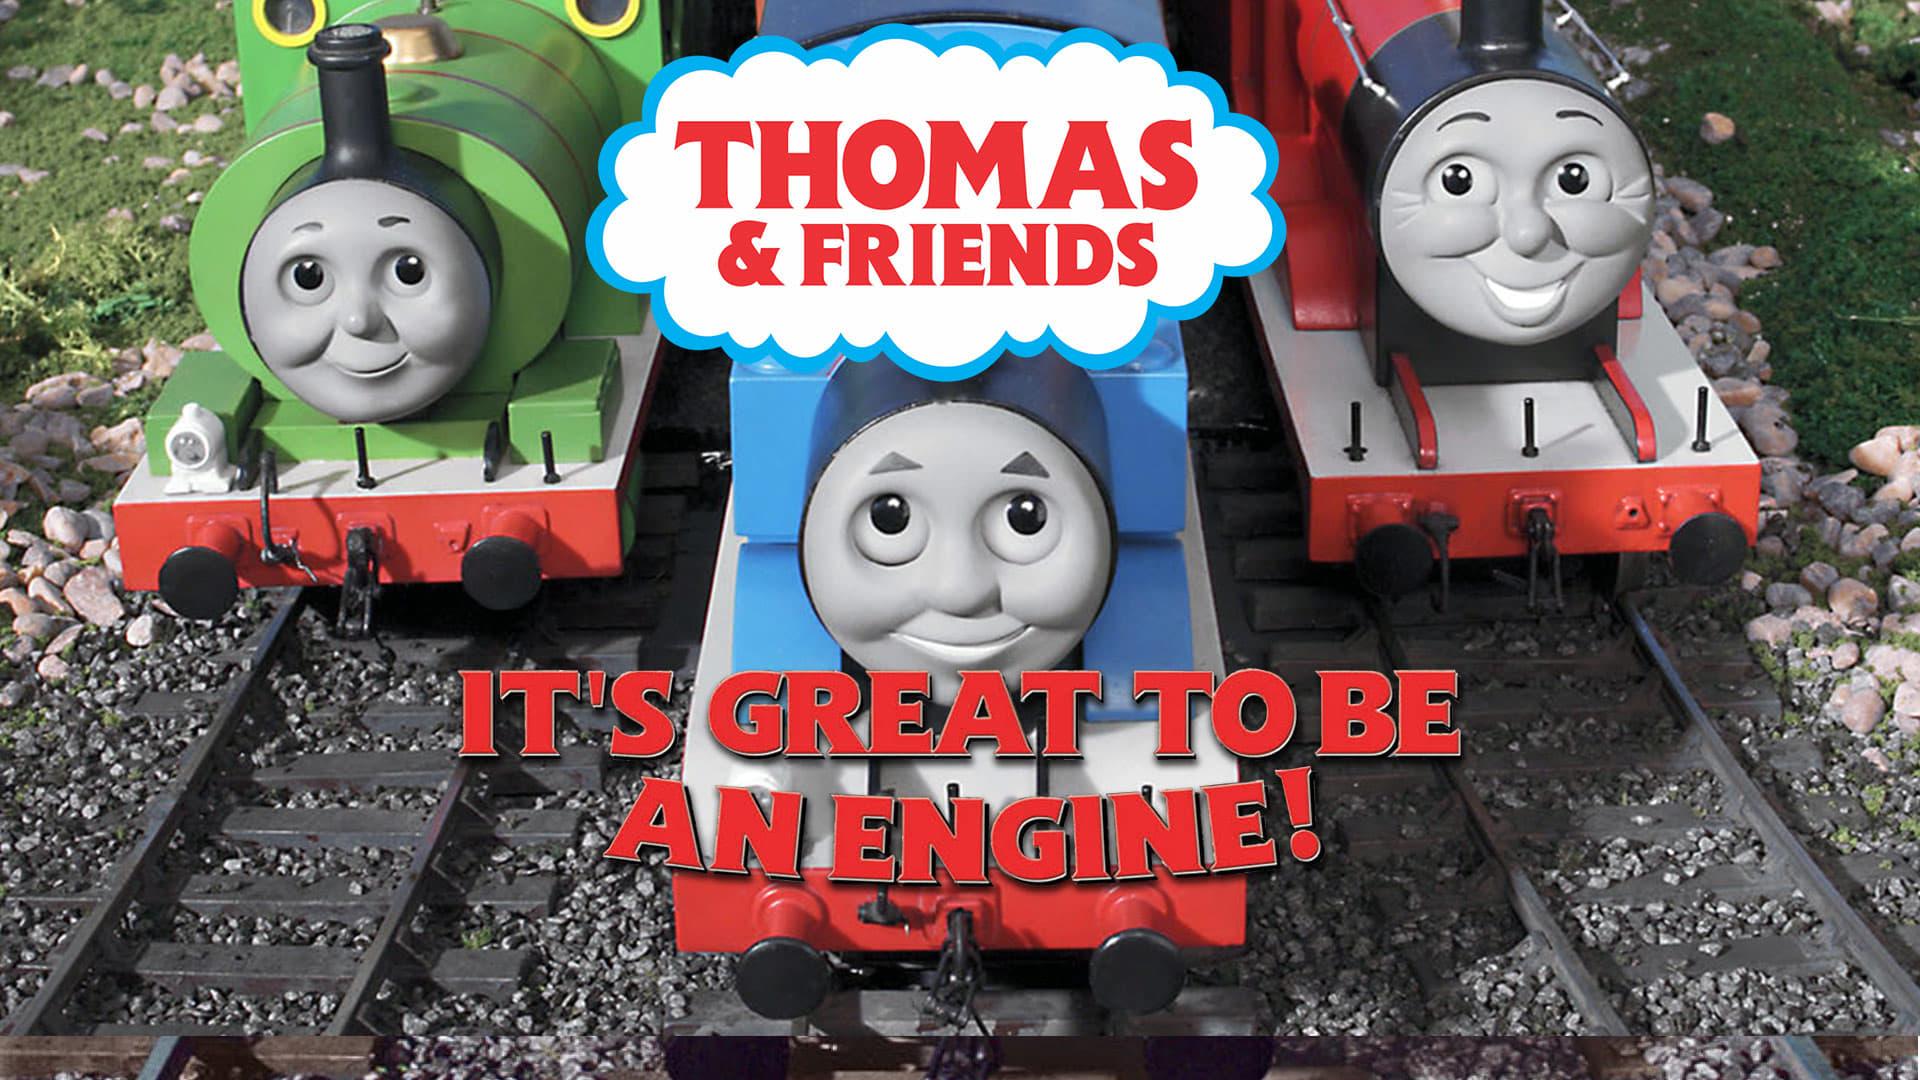 Thomas & Friends: It's Great To Be An Engine backdrop